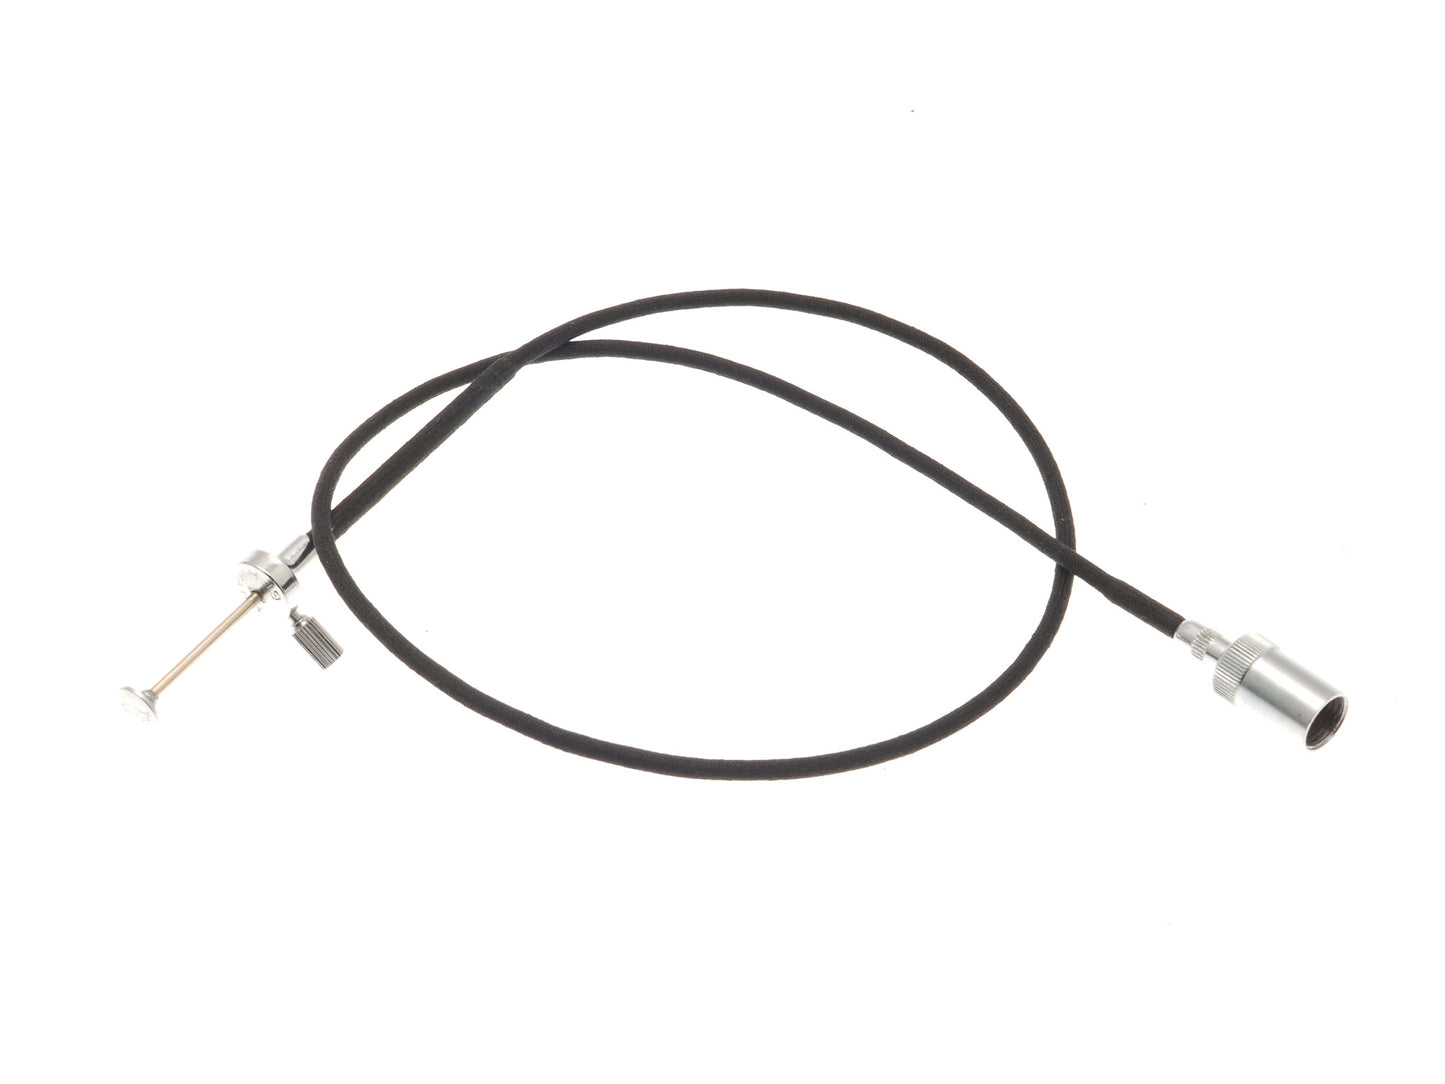 Generic Mechanical Cable Release - Accessory